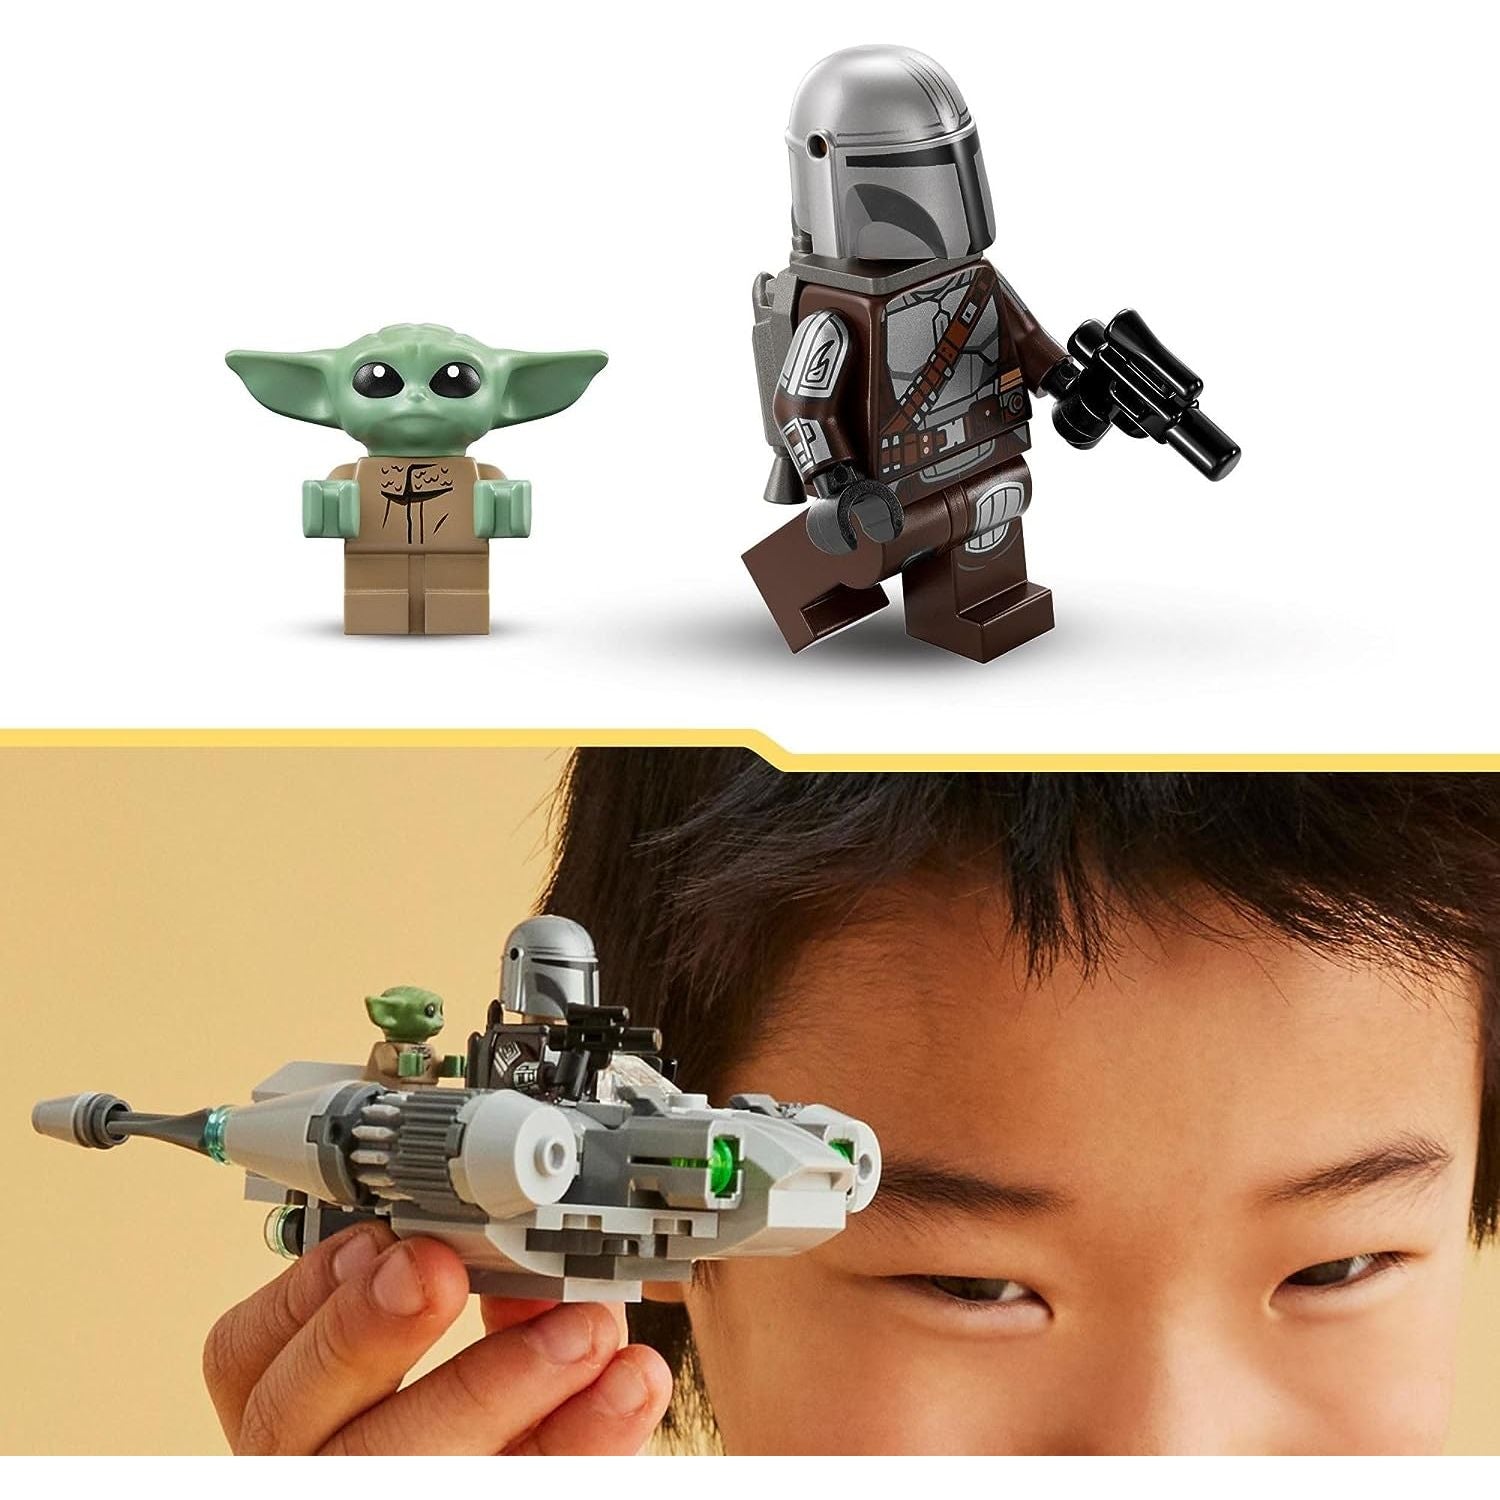 LEGO 75363 Star Wars The Mandalorian’s N-1 Starfighter Microfighter Building Toy Set with Mando and Grogu 'Baby Yoda' Minifigures